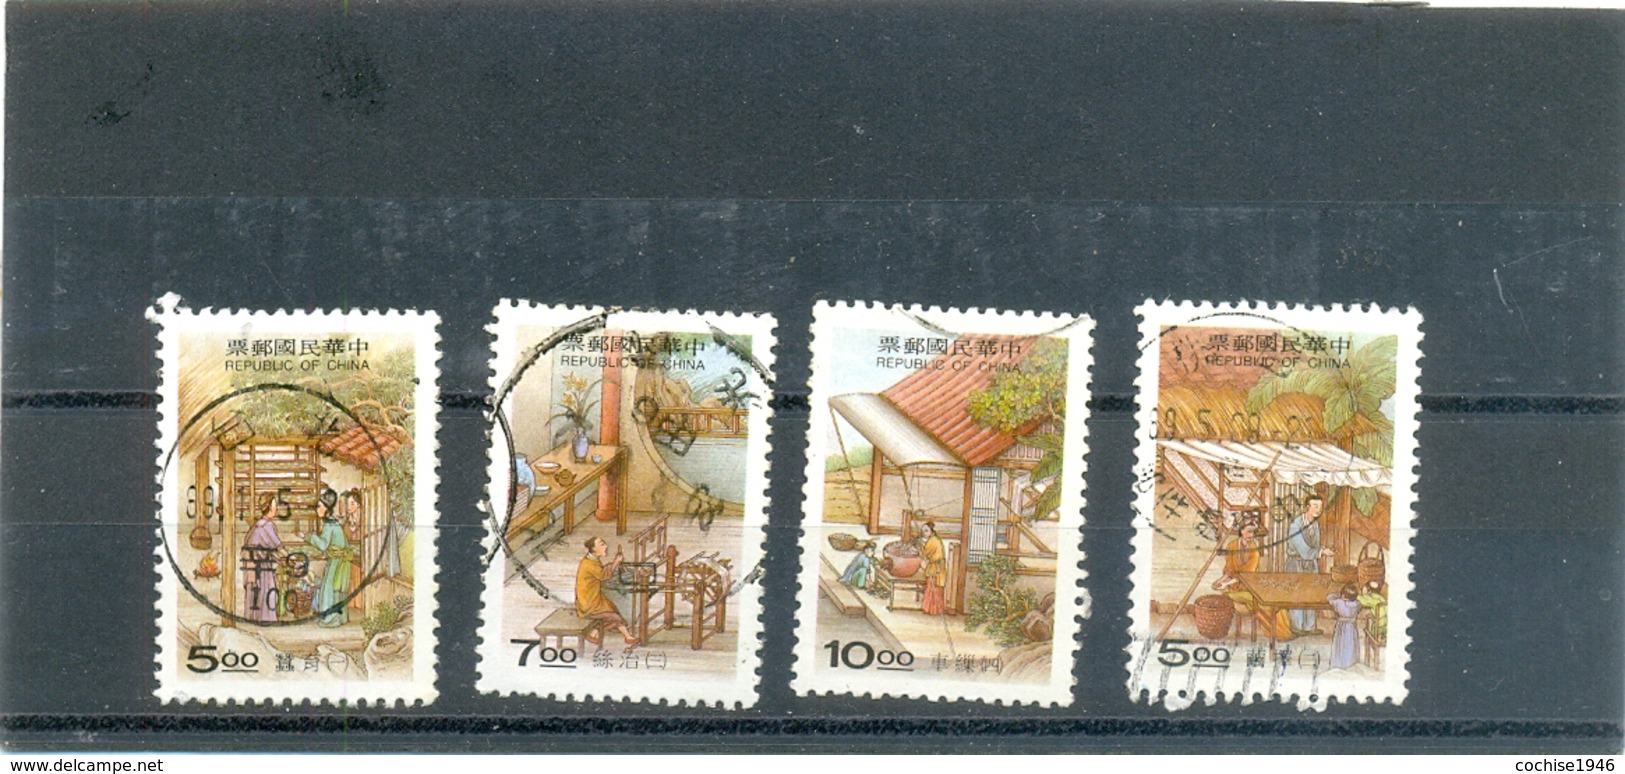 1997 FORMOSE Y & T N° 2441 - 2442 - 2443 - 2444  ( O ) Les 4 Timbres - Usati